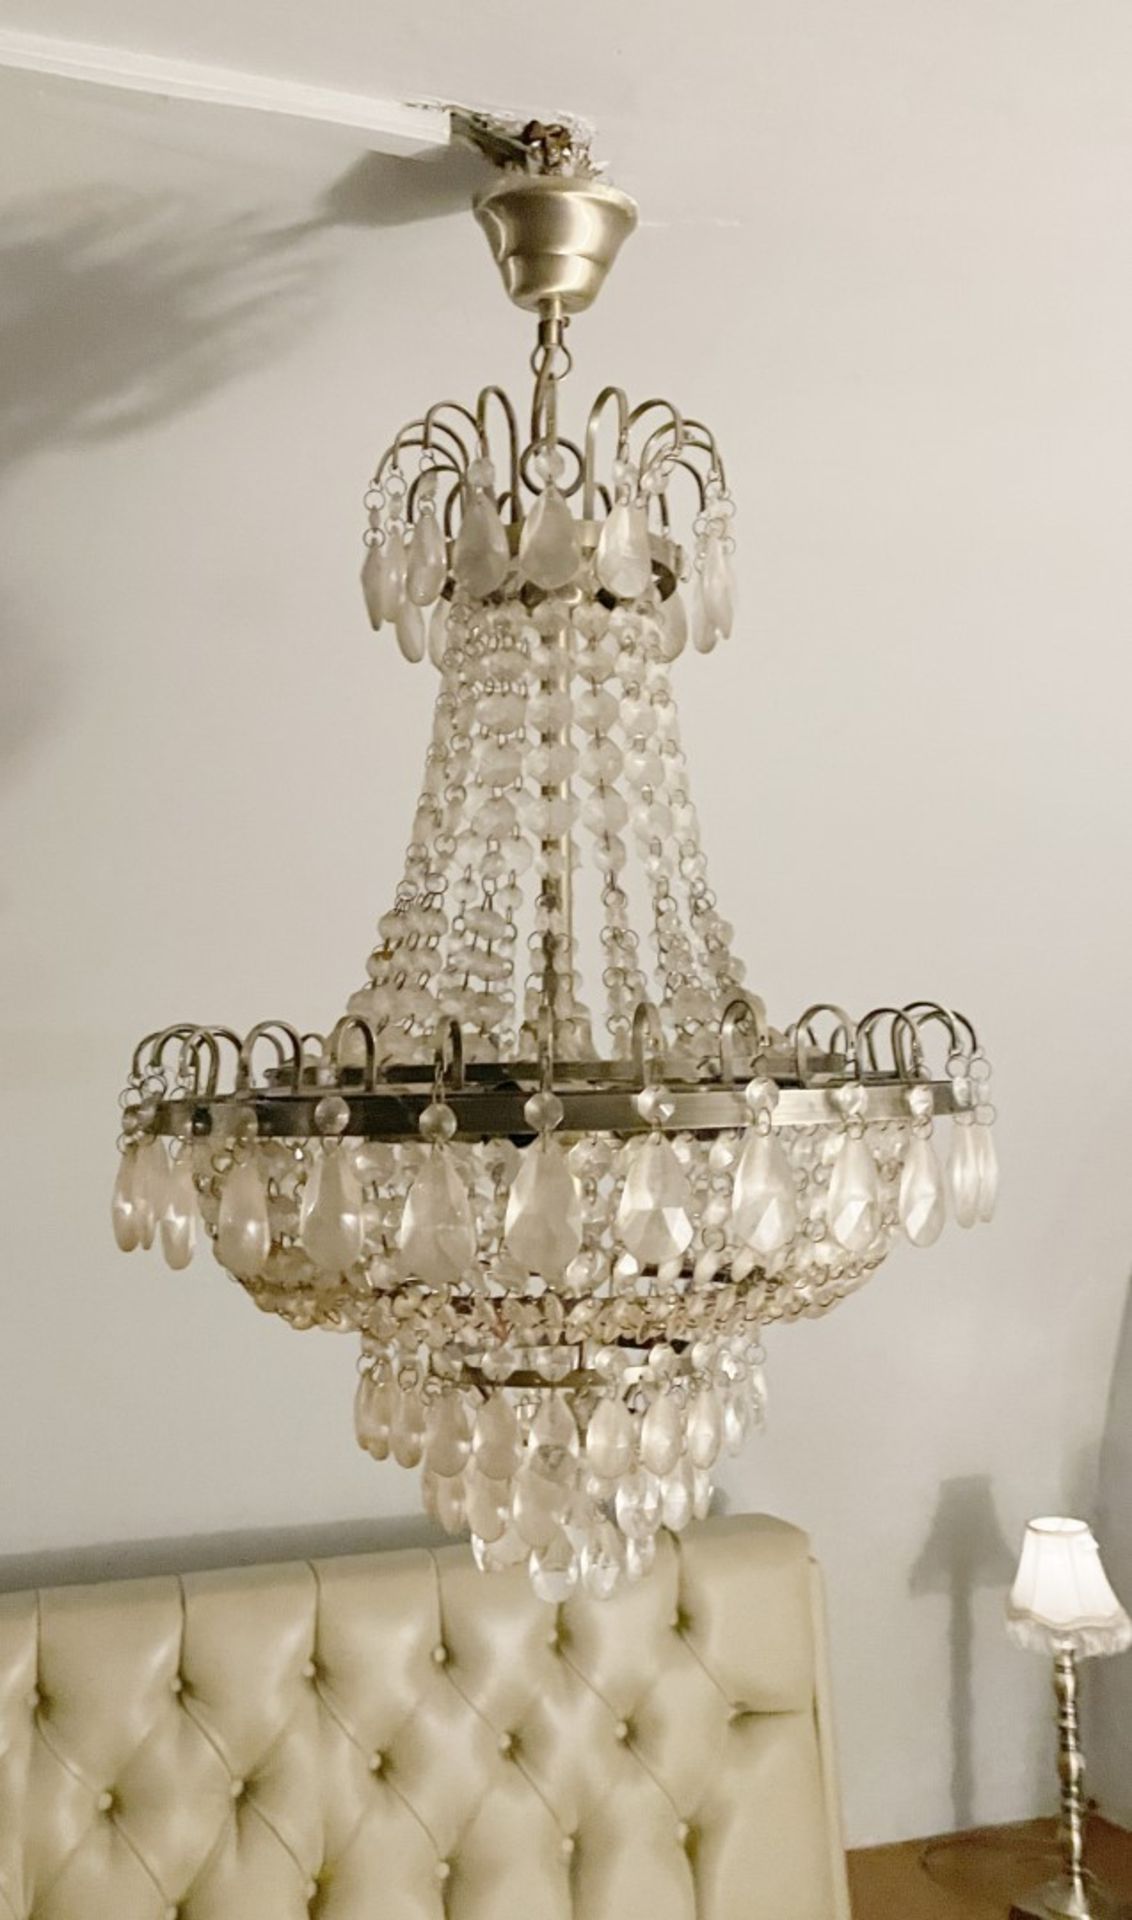 1 x Large Gustavian-style Chandelier Ceiling Pendant Light Adorned with Clear Droplets - Image 4 of 9